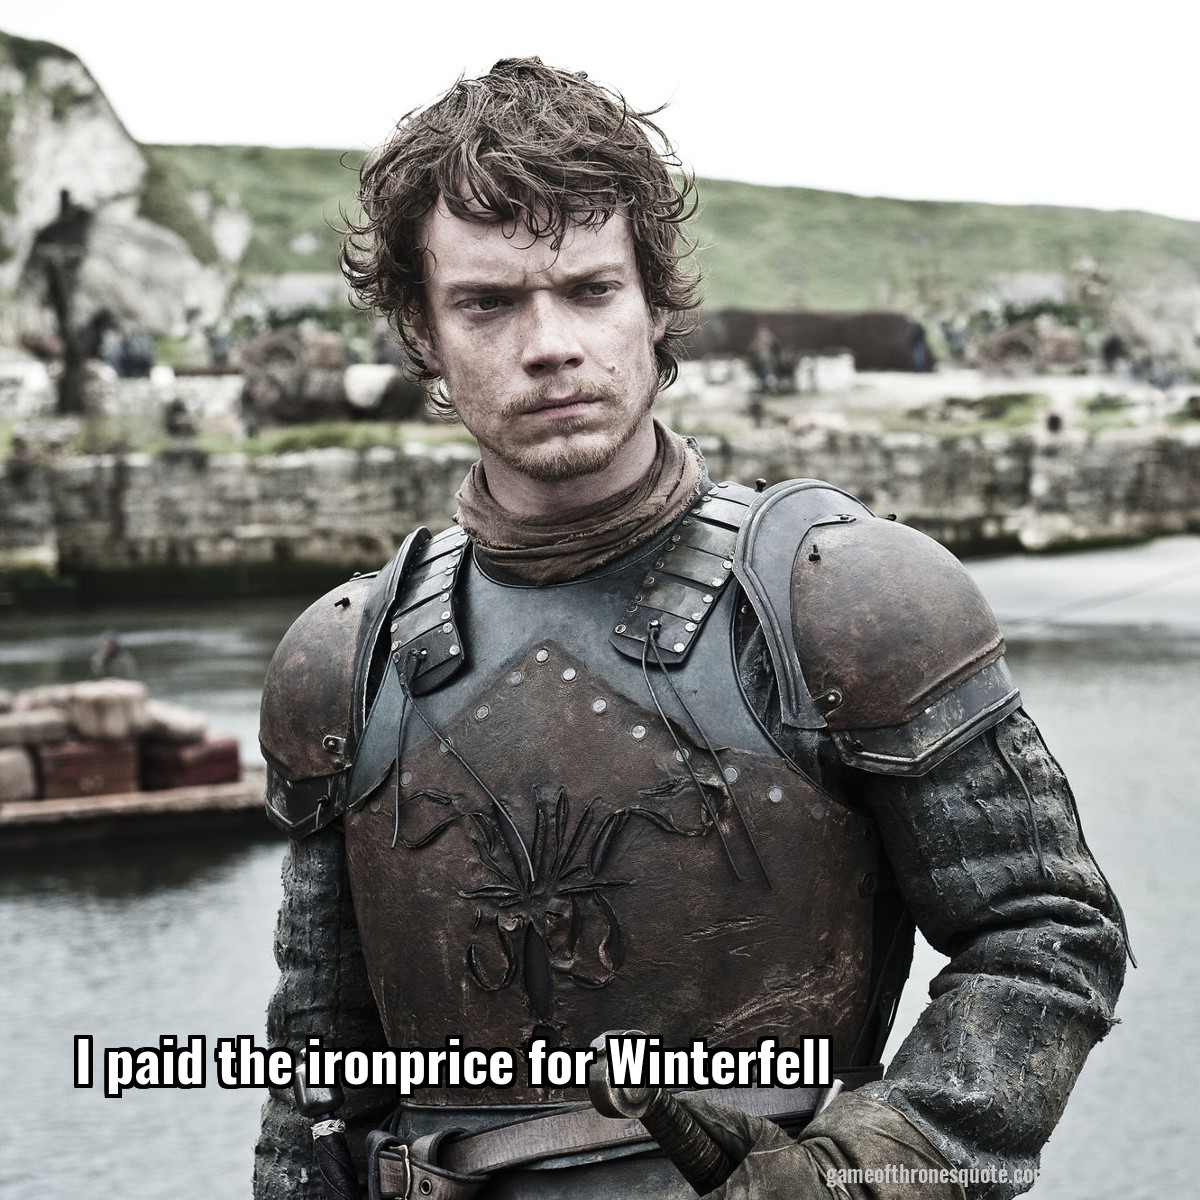 I paid the ironprice for Winterfell